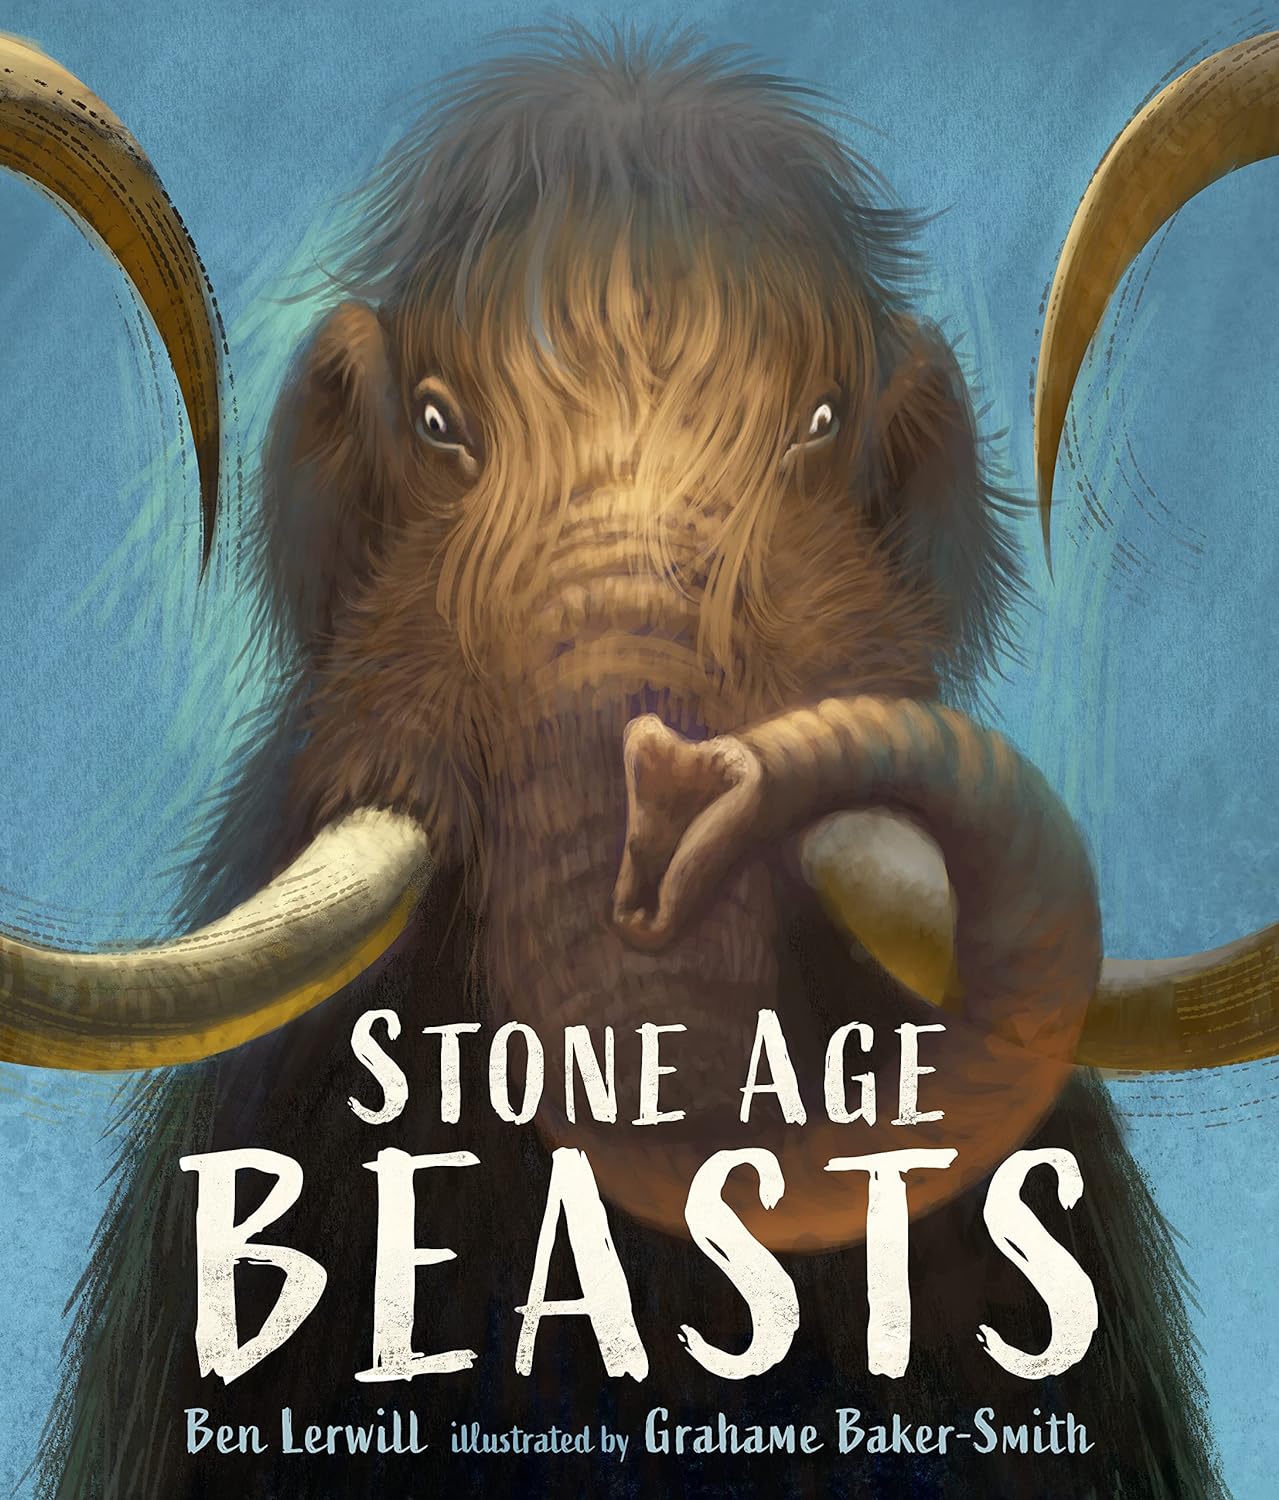 Wooly Mammoth on the cover of Stone Age Beasts by Ben Lerwill and illustrated by Graham Baker-Smith